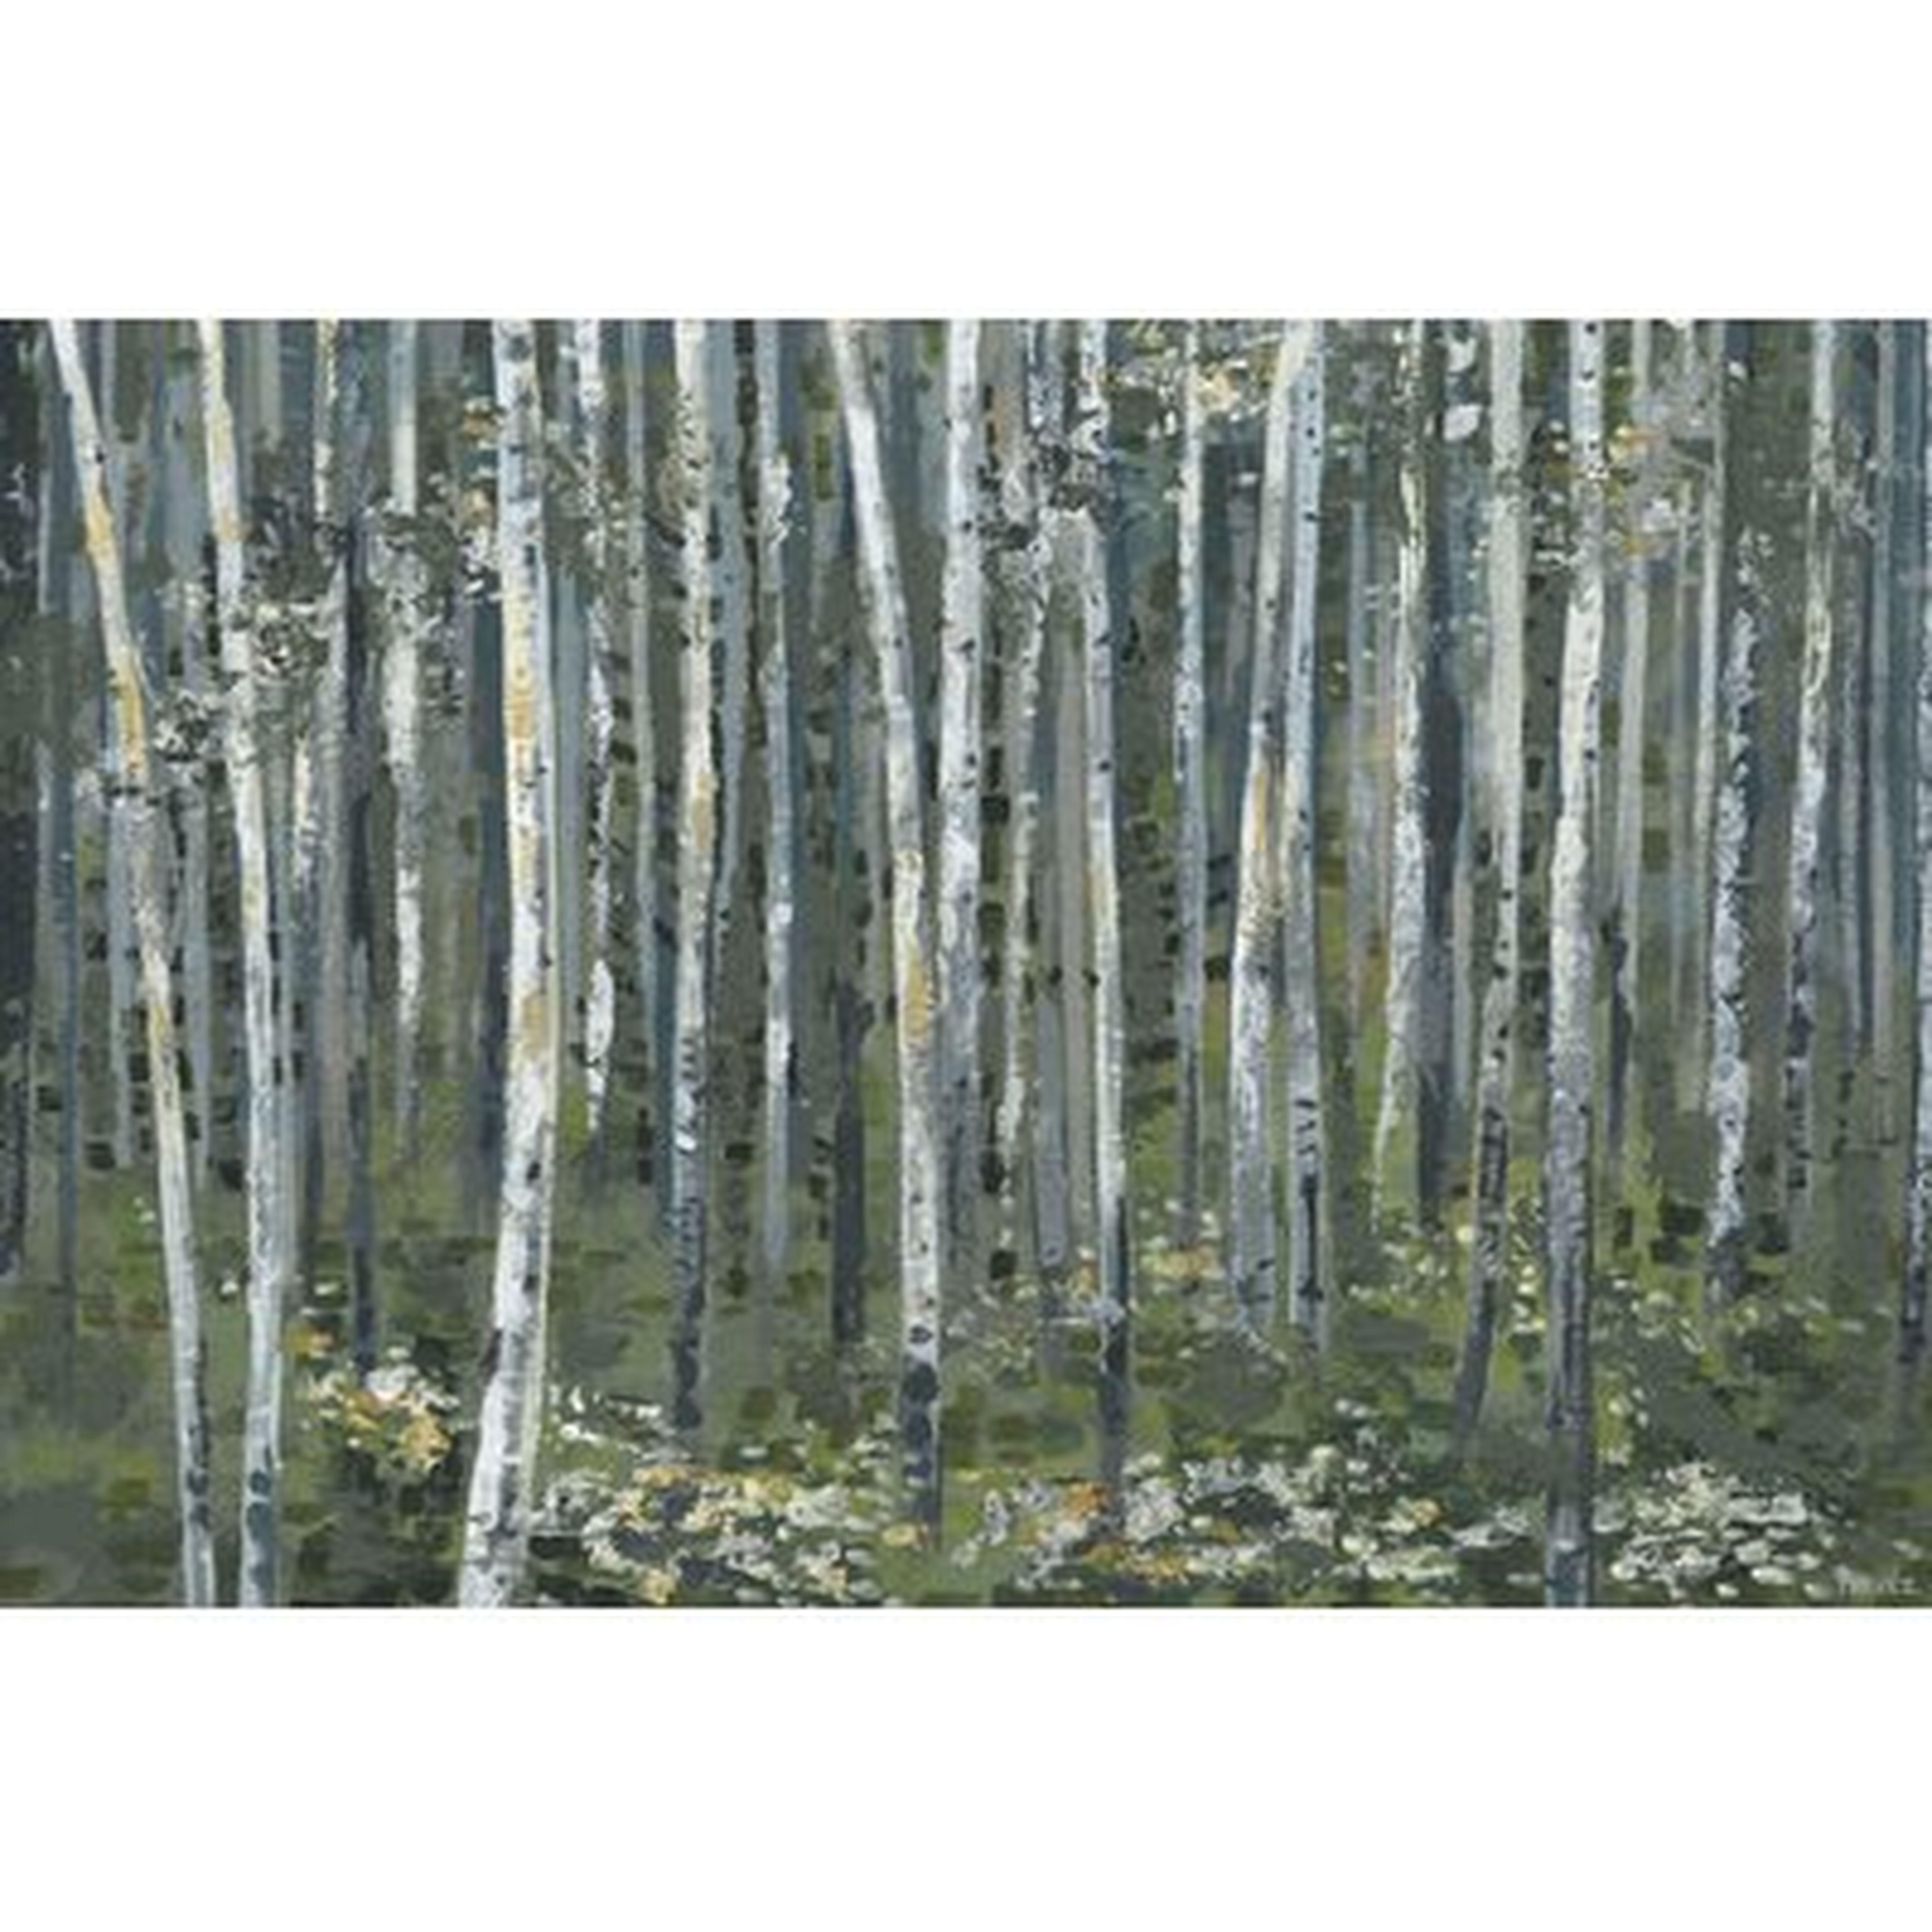 'Magical Green Forest' Print on Wrapped Canvas - Wayfair